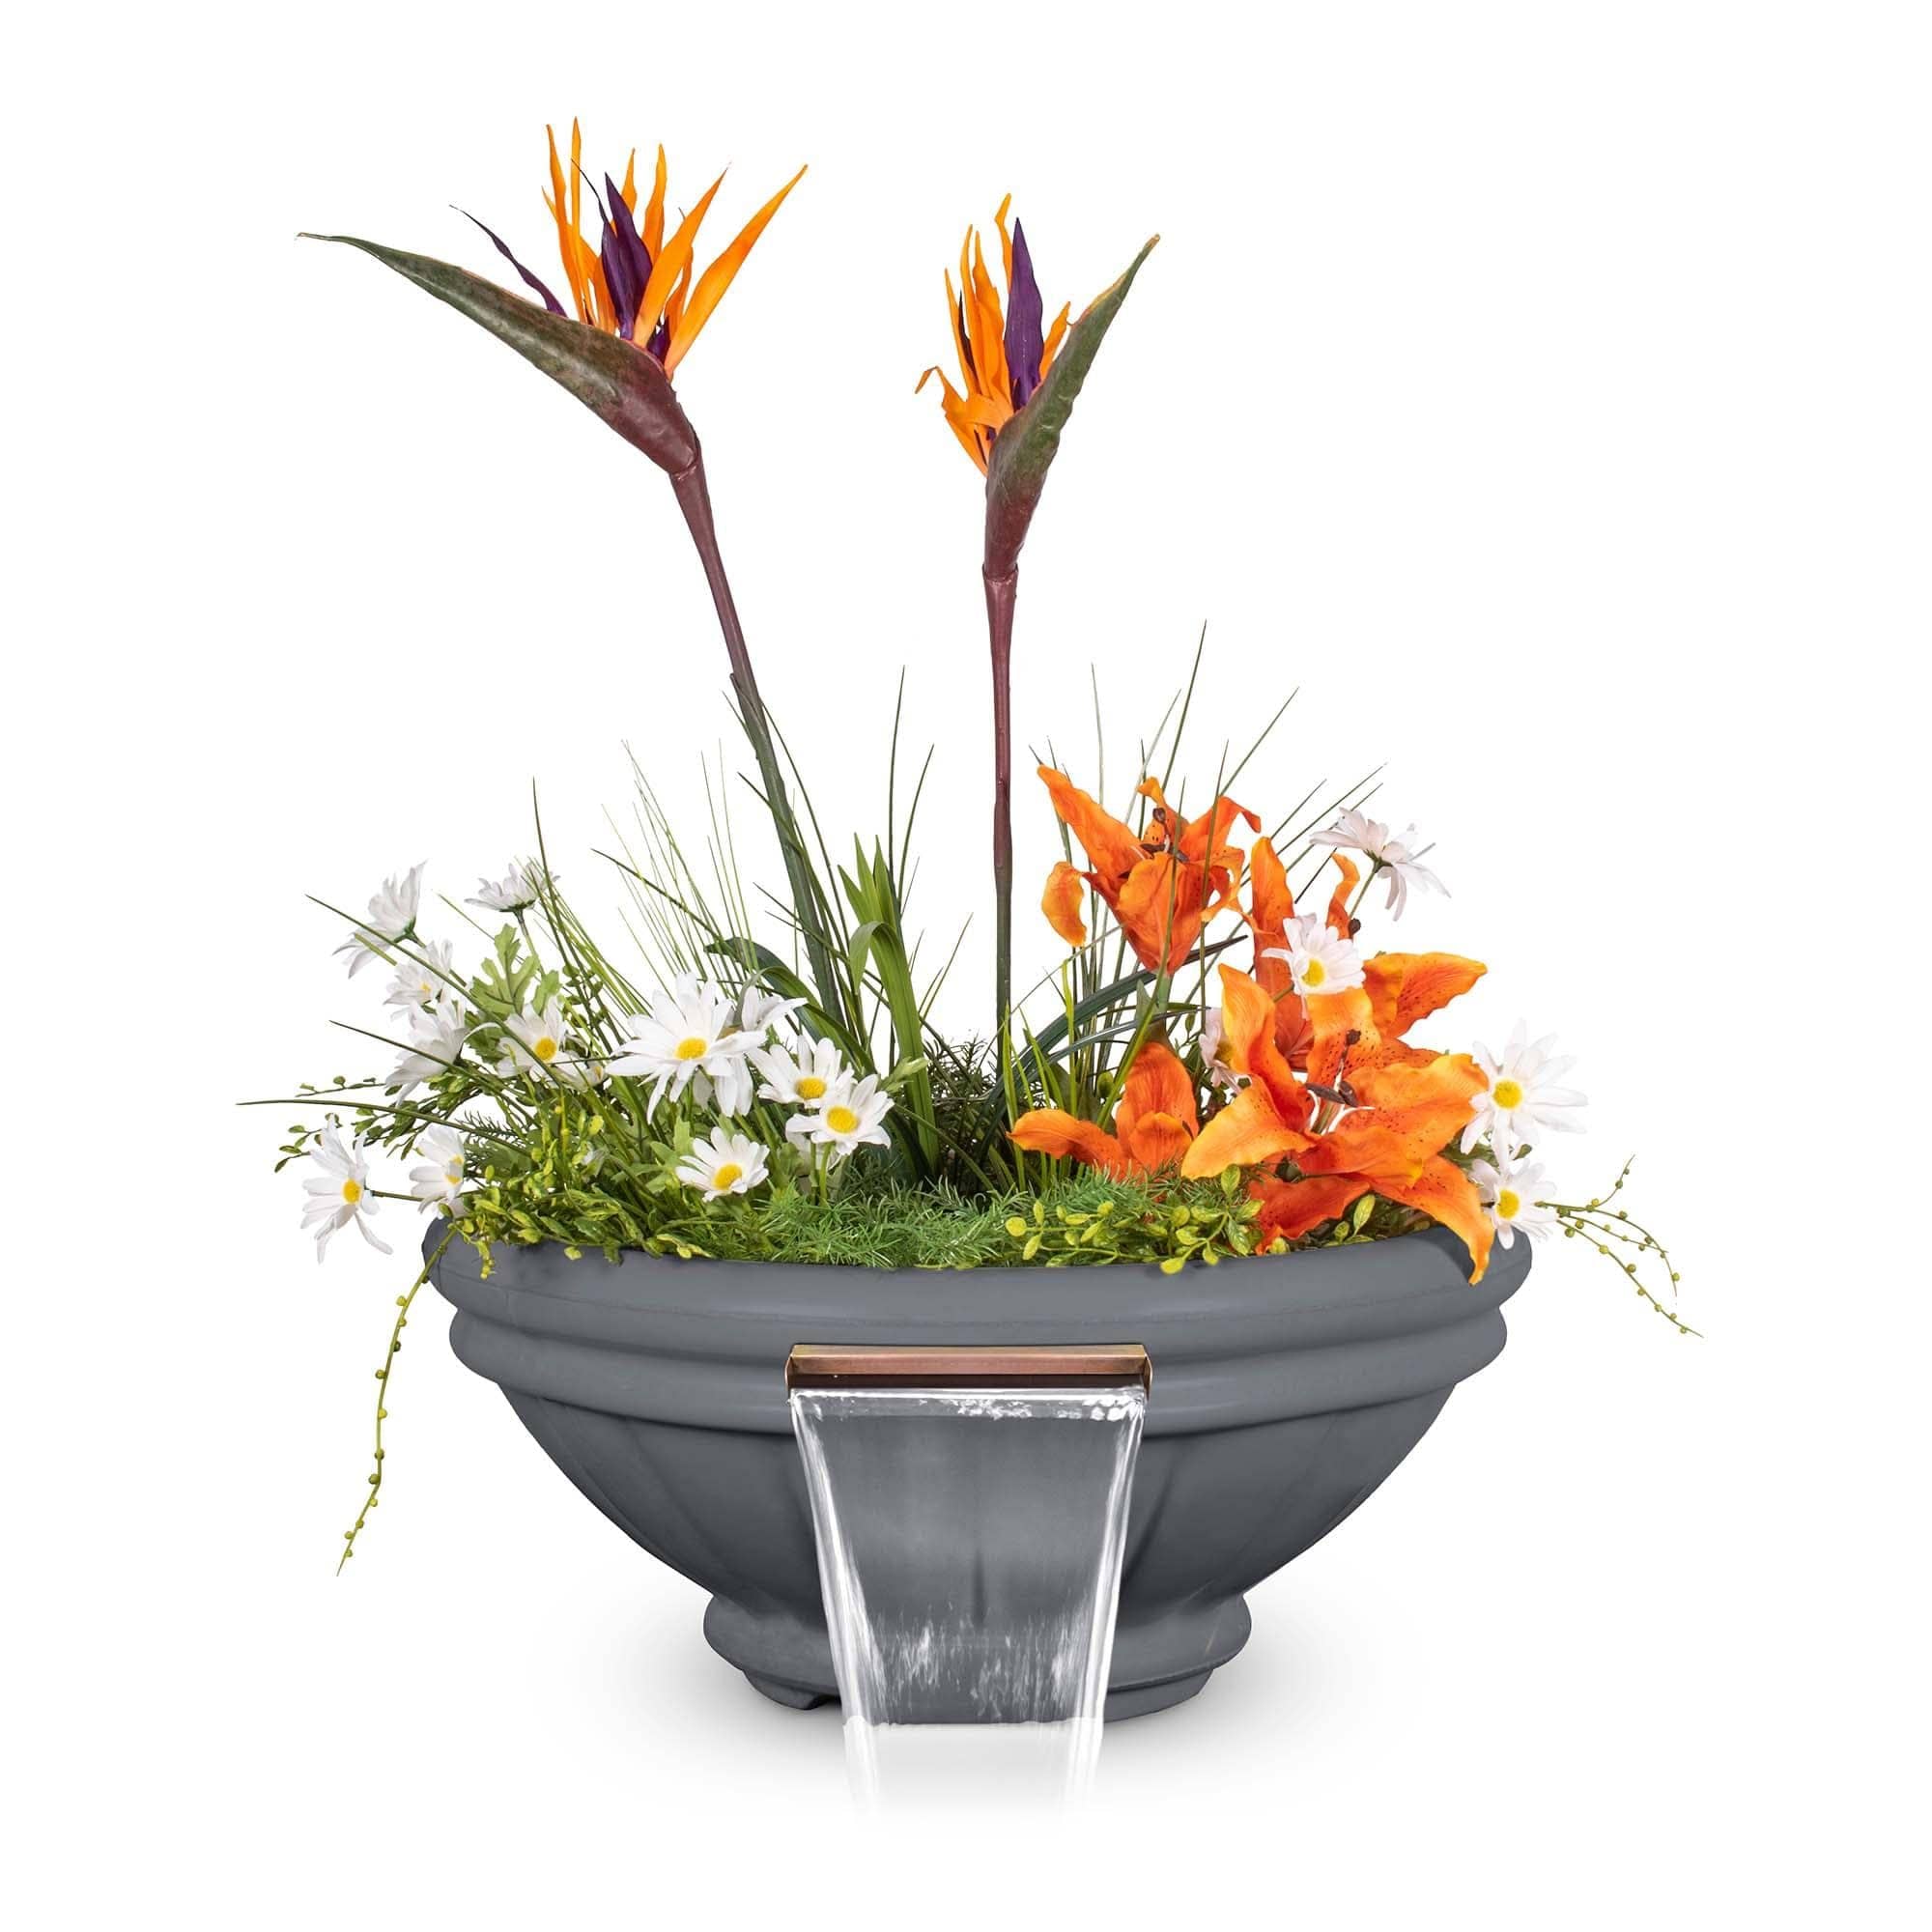 The Outdoor Plus Roma Planter and Water Bowl - Concrete